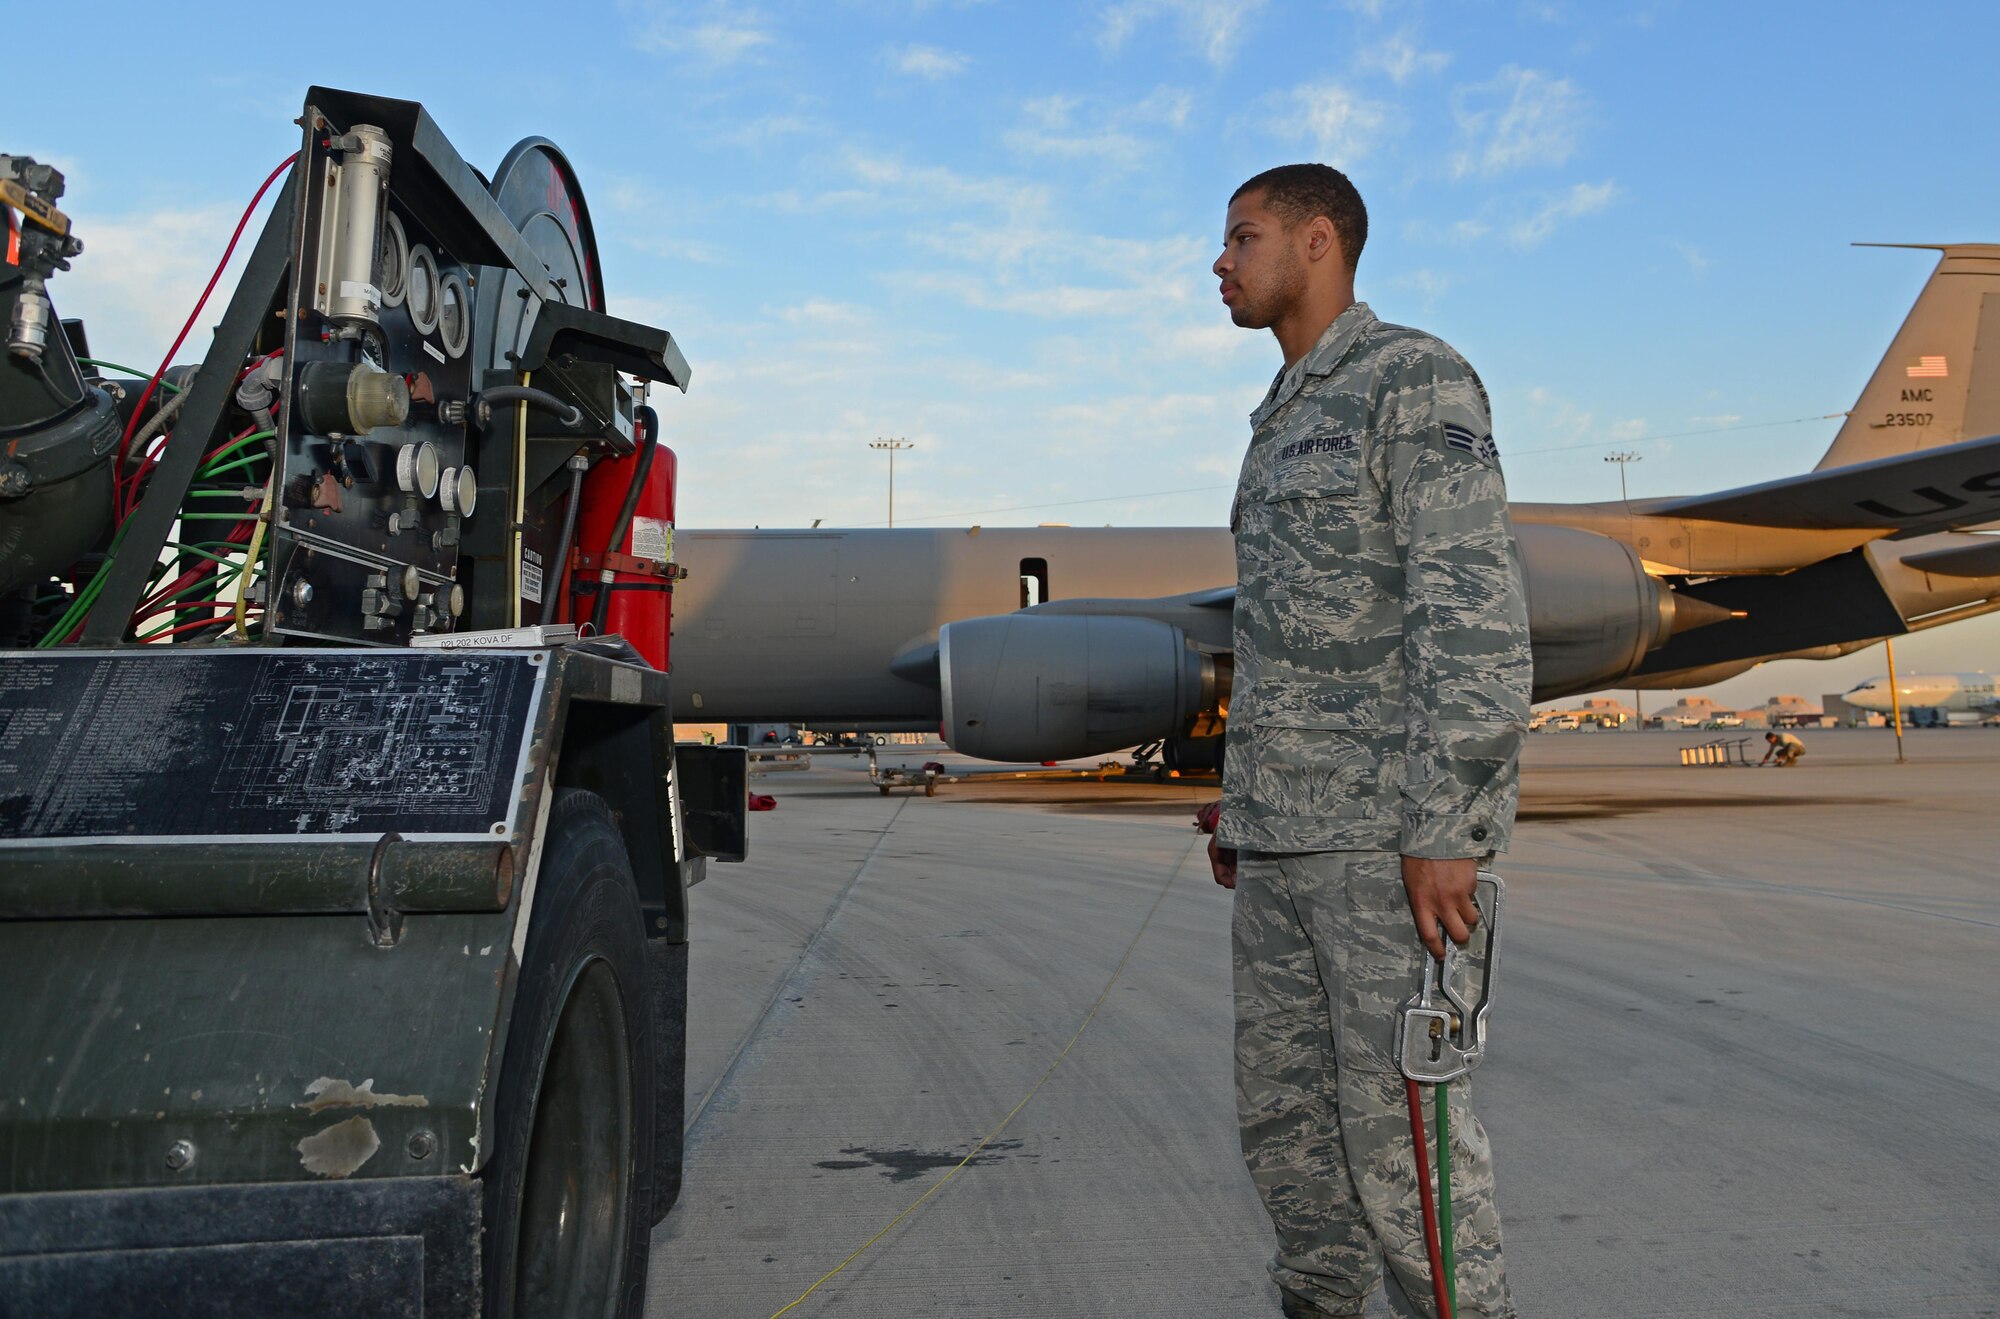 Airman 1st Class Jovonte Atkins, 379th Expeditionary Logistics Readiness Squadron fuels specialist, monitors an R-12 fuel control panel while refueling an aircraft at Al Udeid Air Base, Qatar, Feb. 5, 2015. Since 2001, the 379th ELRS fuels flight has delivered more than three billion gallons of aviation and ground fuel in support of operations Enduring Freedom and Iraqi Freedom. (U.S. Air Force photo by Master Sgt. Kerry Jackson)